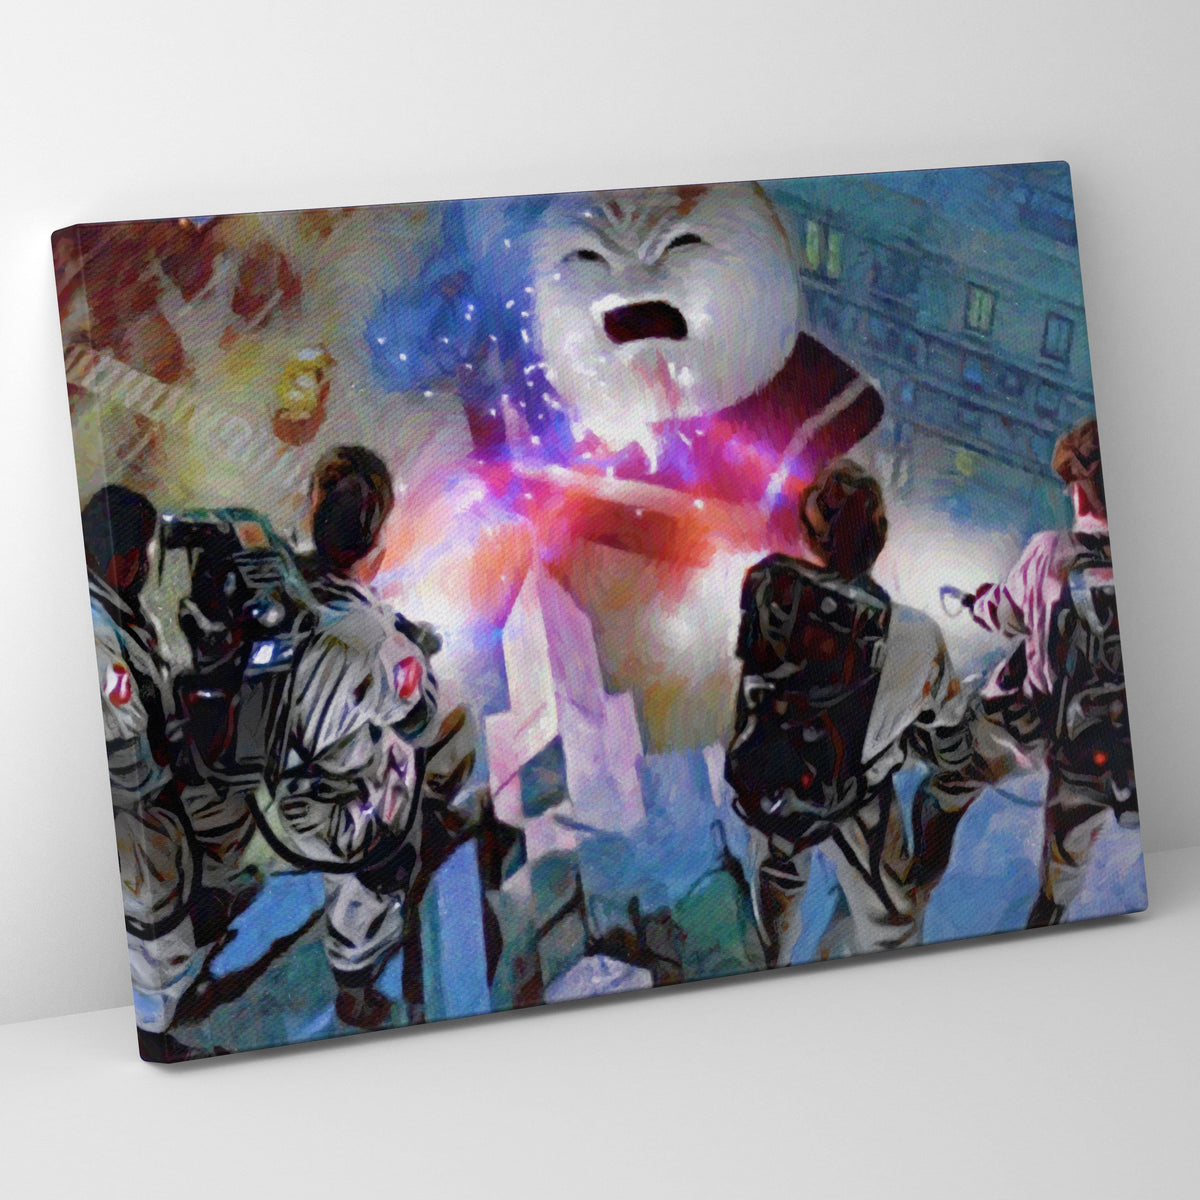 1984 Ghostbusters Roasted Poster/Canvas - 0